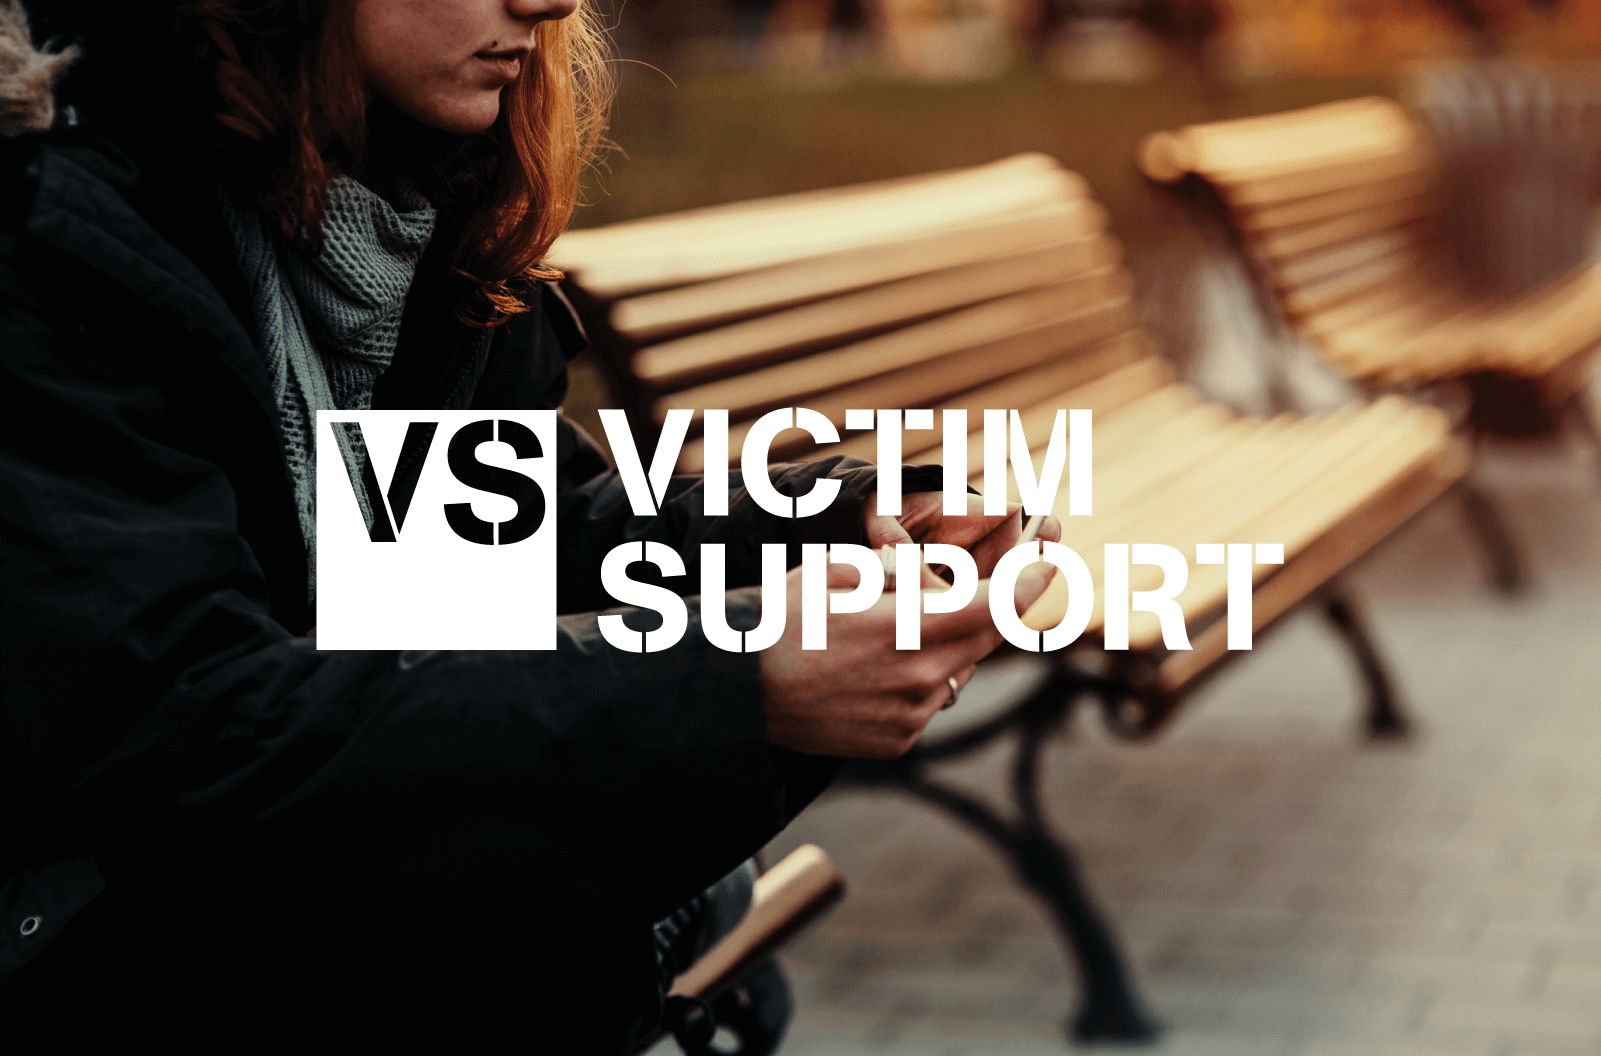 (c) Victimsupport.org.uk